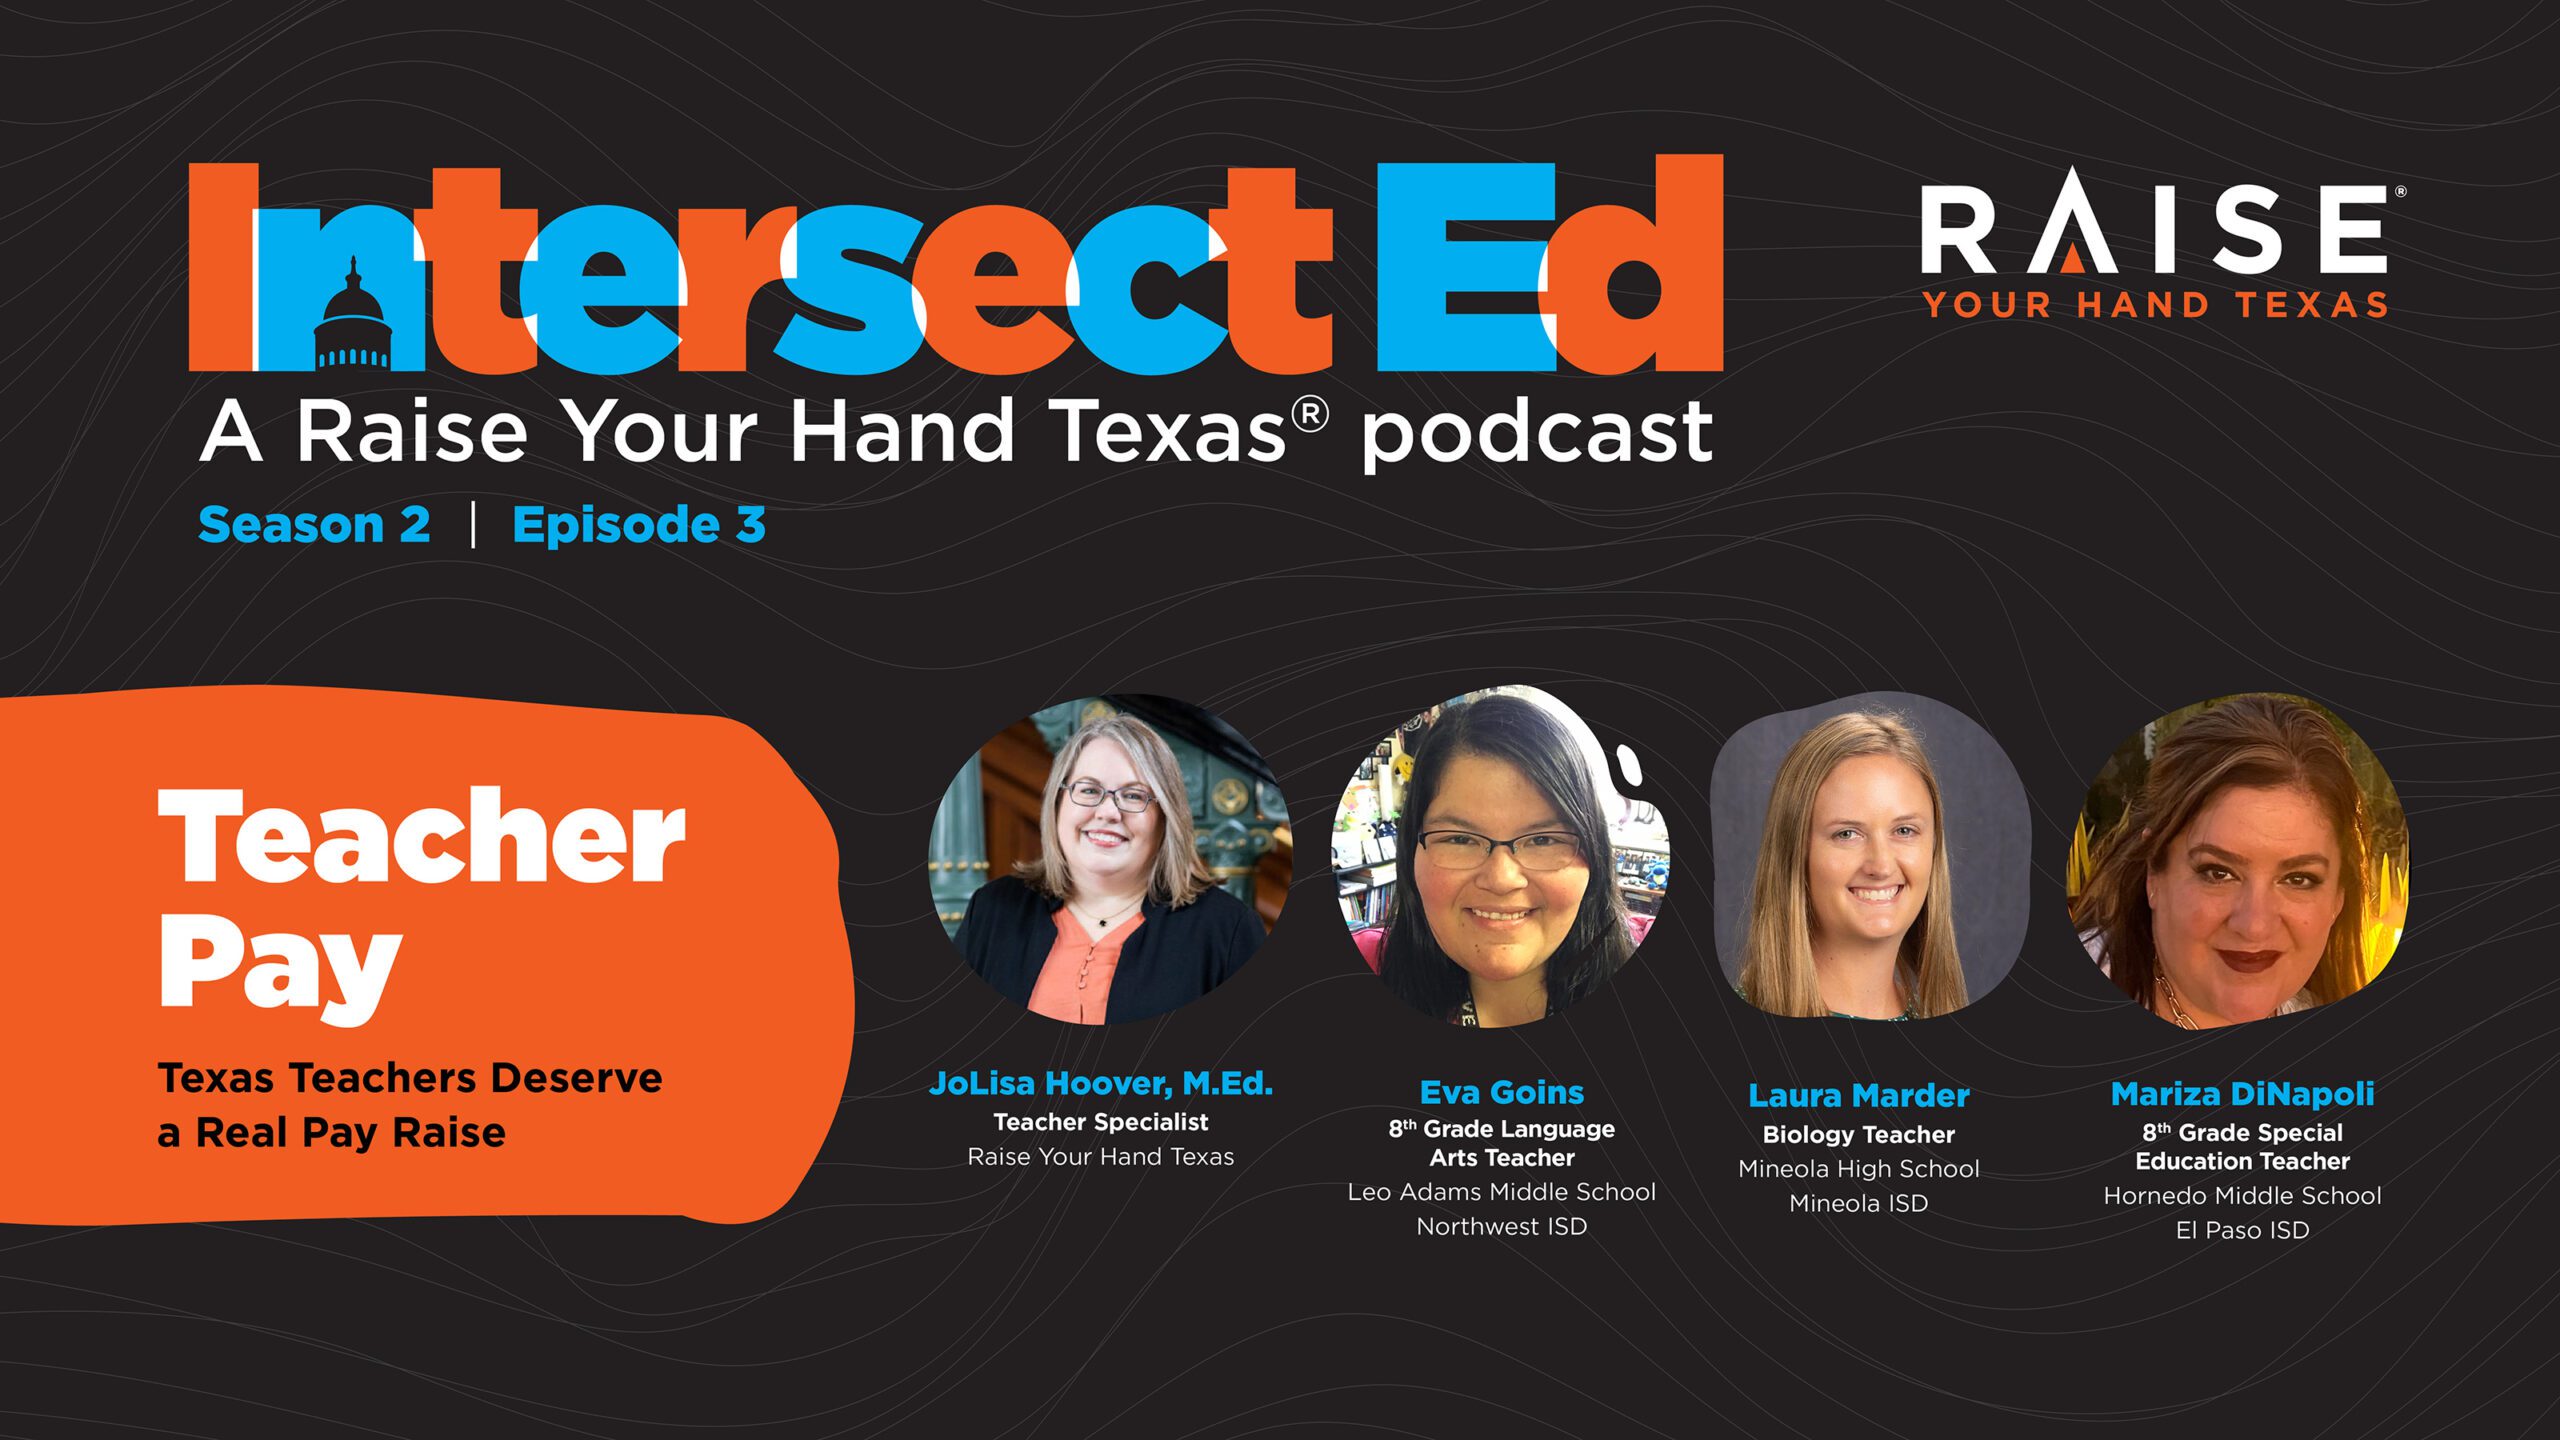 Intersect Ed Podcast on Teacher Pay